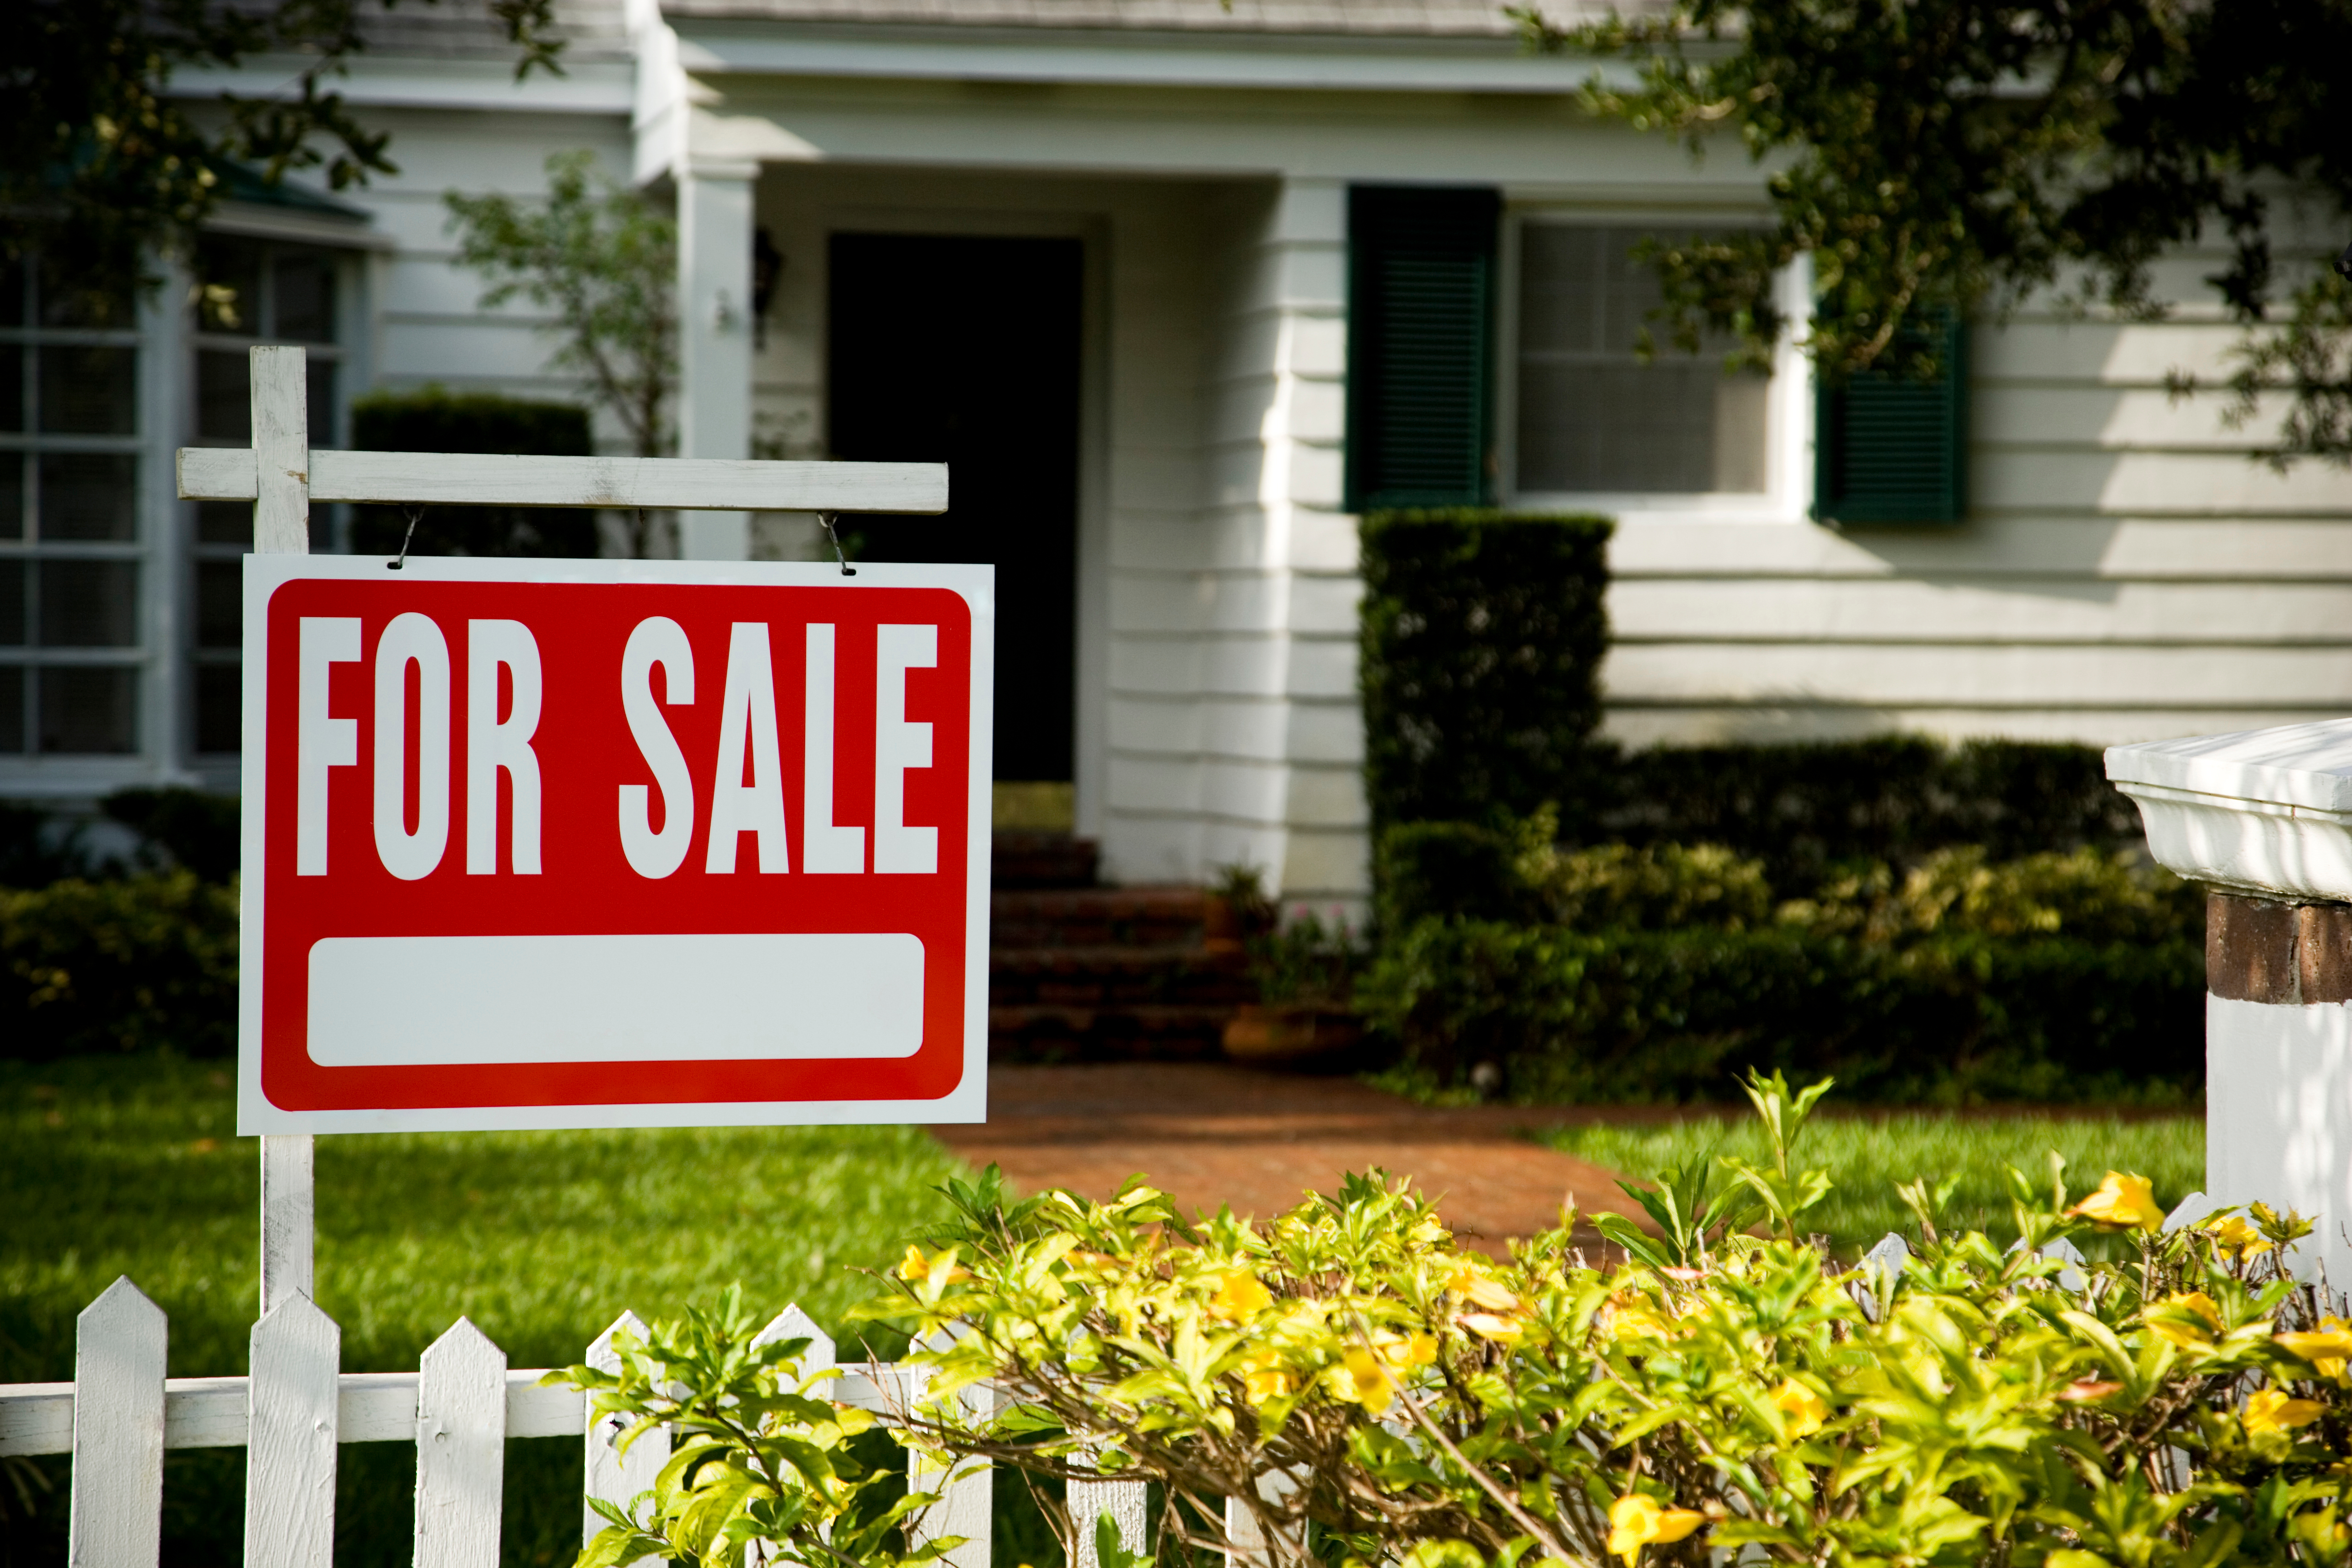 For sale sign | Source: Shutterstock.com